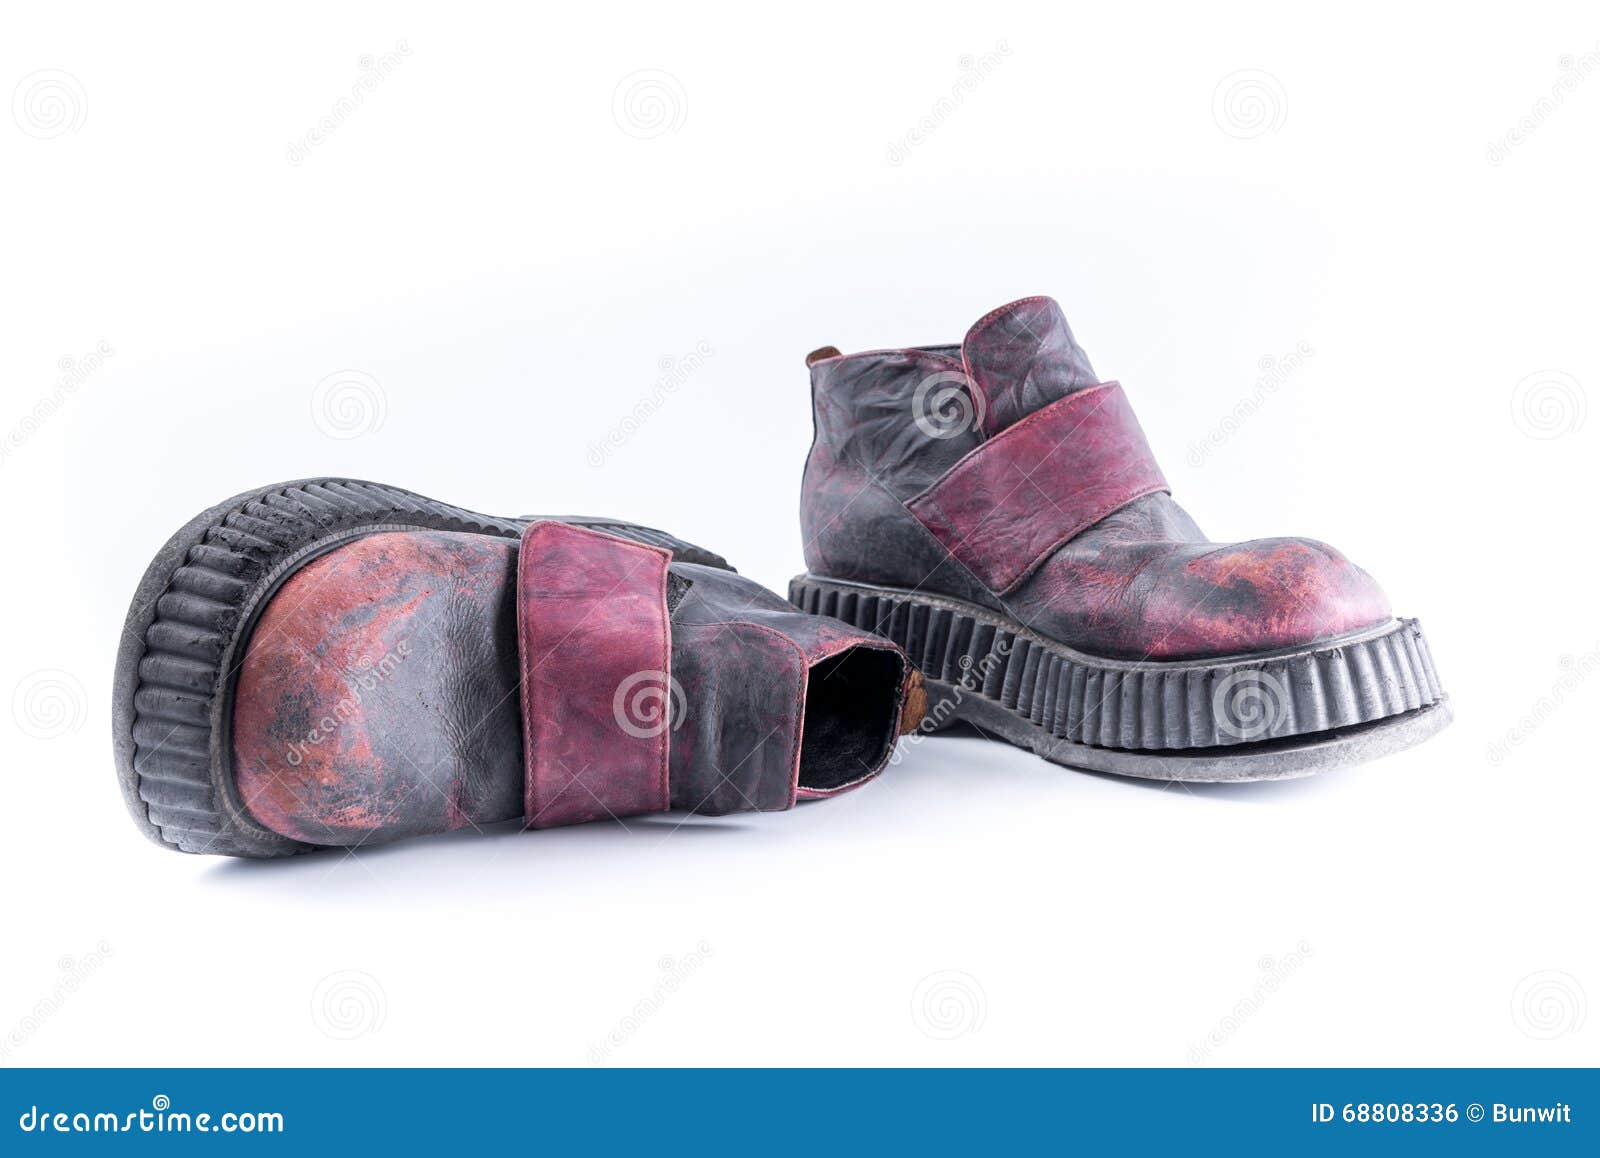 Old Vintage Boots on White Background Stock Photo - Image of cowboy ...